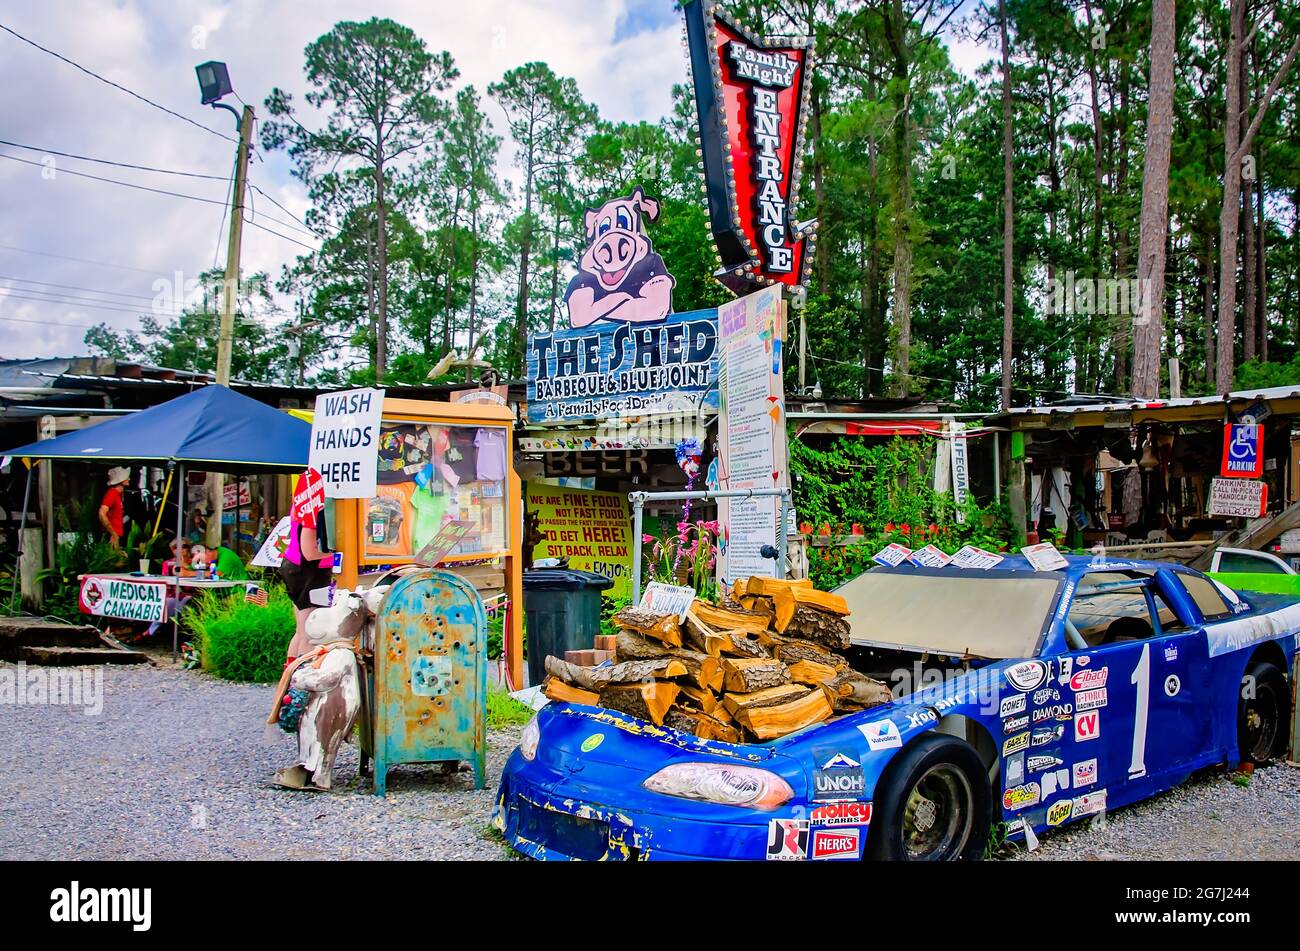 Das Shed Barbeque and Blues Joint ist am 4. Juli 2021 in Ocean Springs, Mississippi, abgebildet. Stockfoto